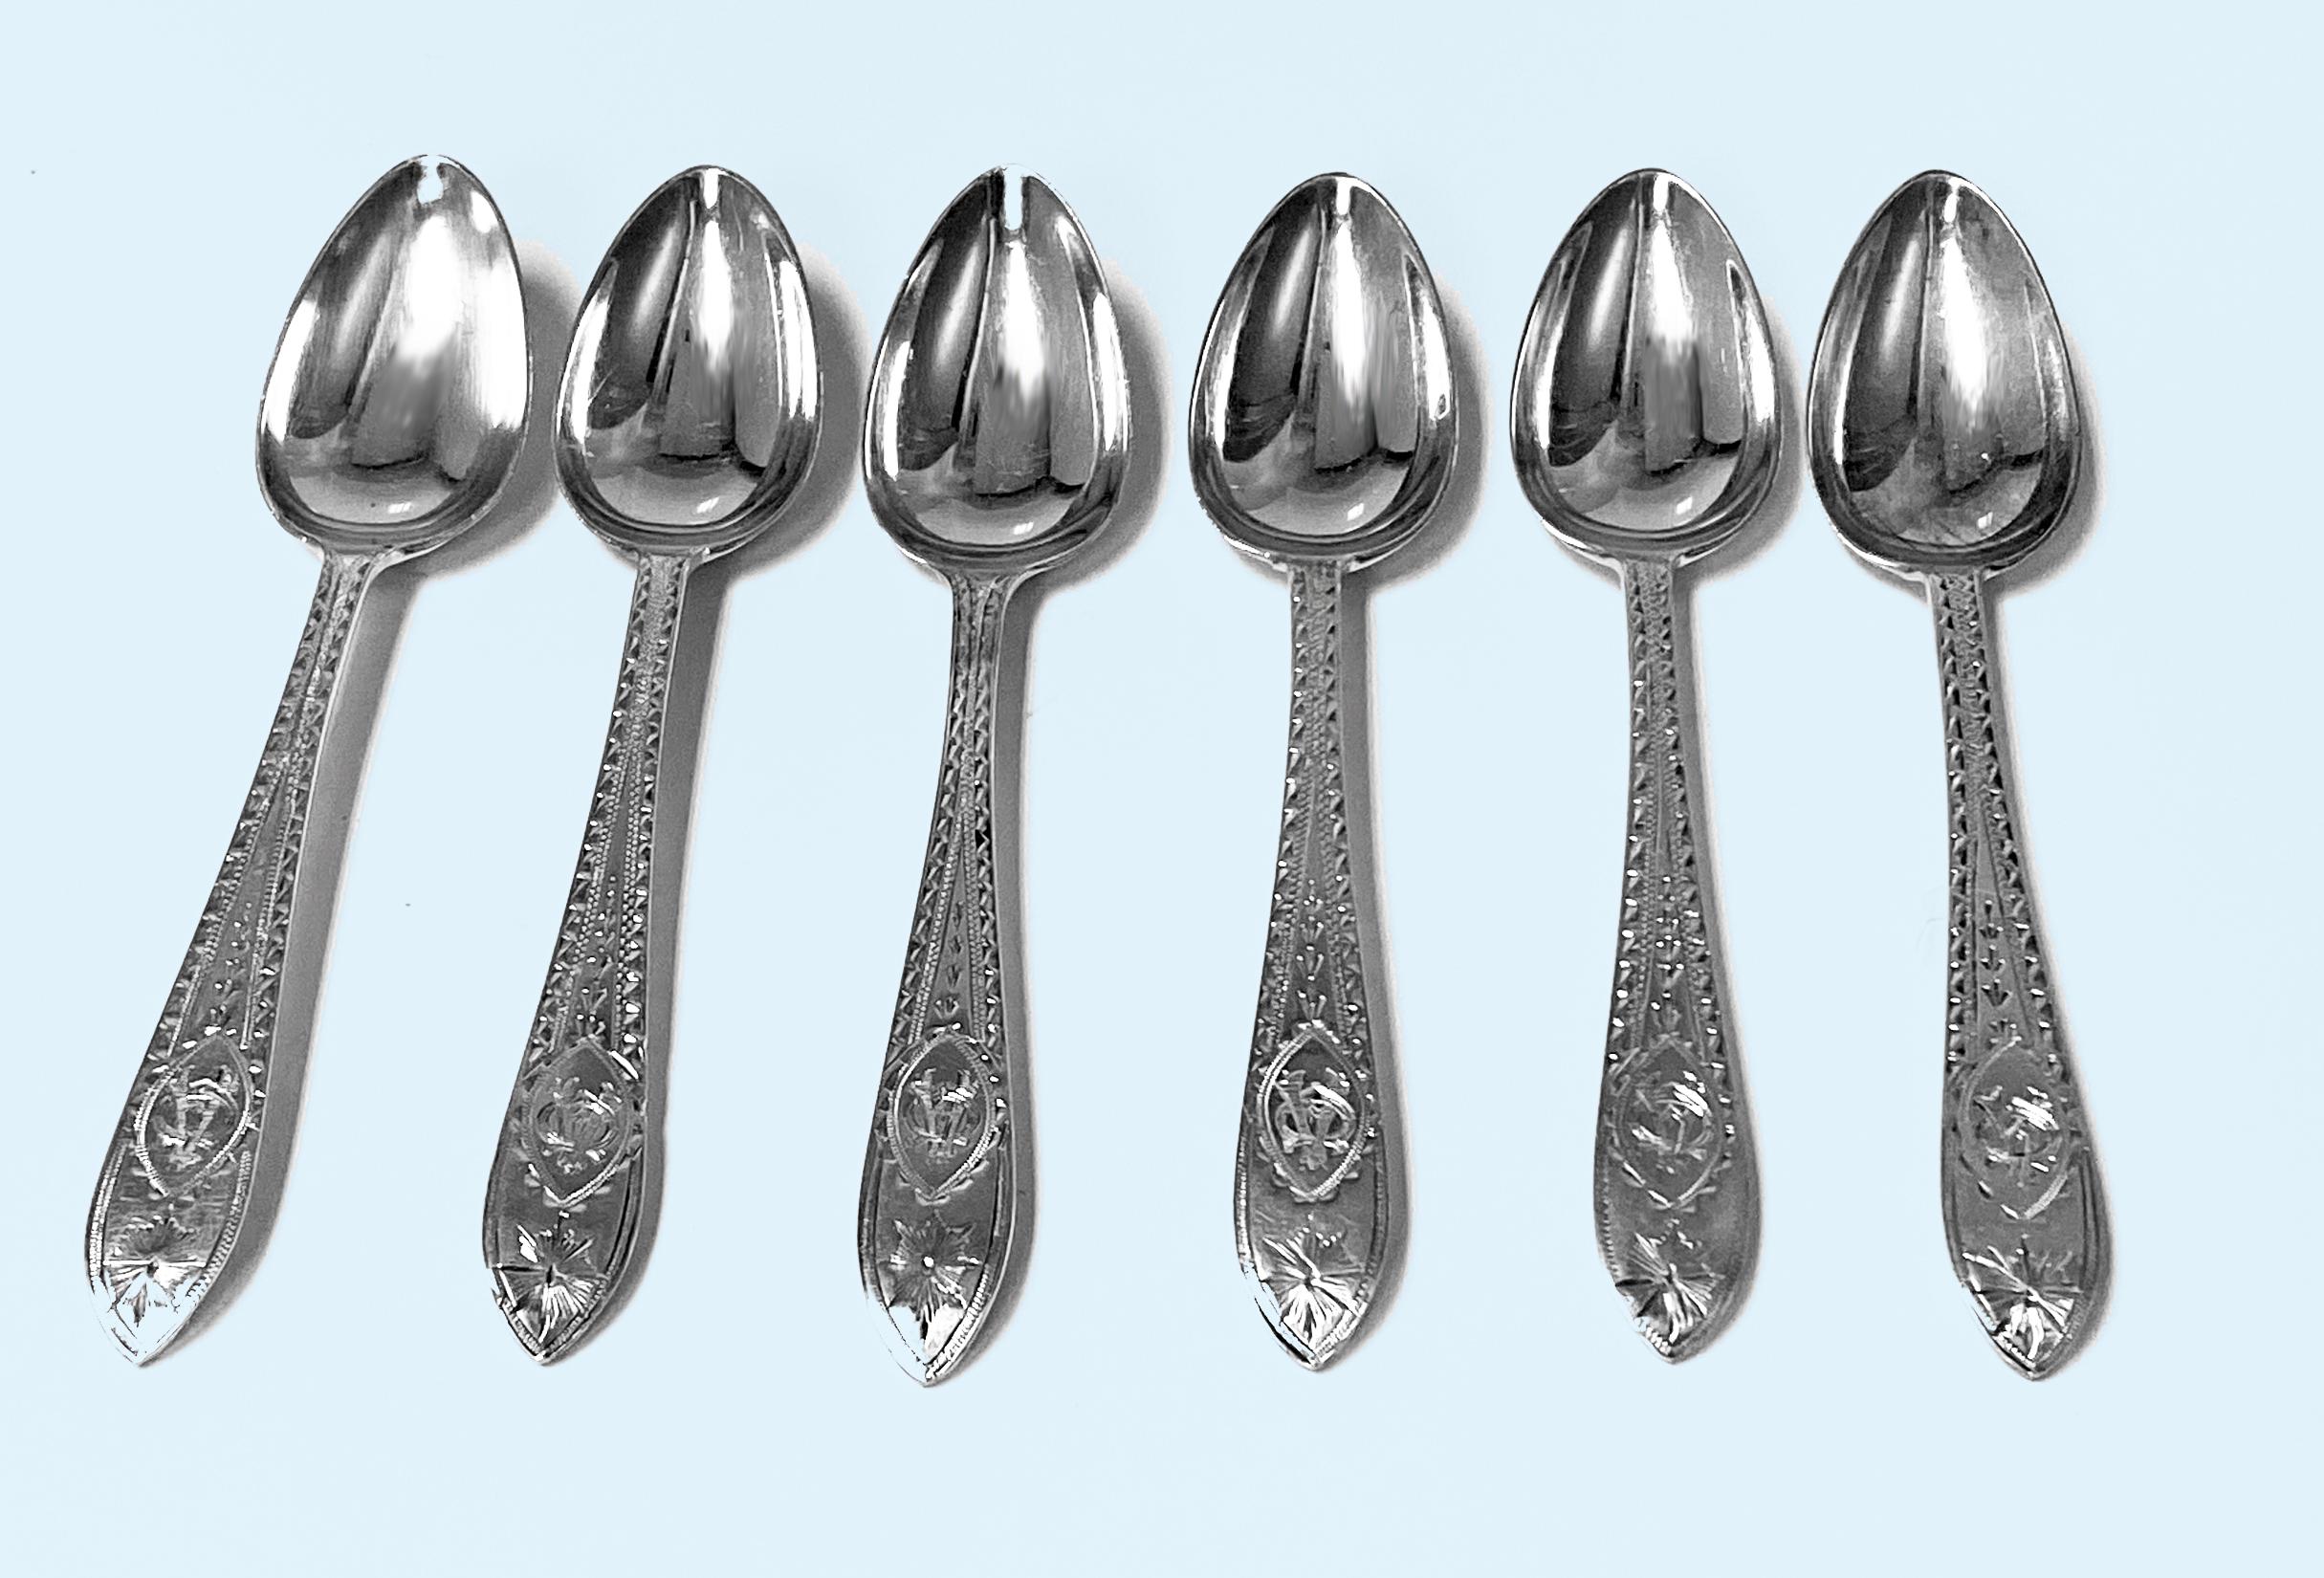 Irish Antique Silver Bright cut Celtic point large Teaspoons Dublin 1891 John Smith. Each very nice crisp brightcut pattern and cypher. Lengths: 5 inches. Reflections from photography only. 